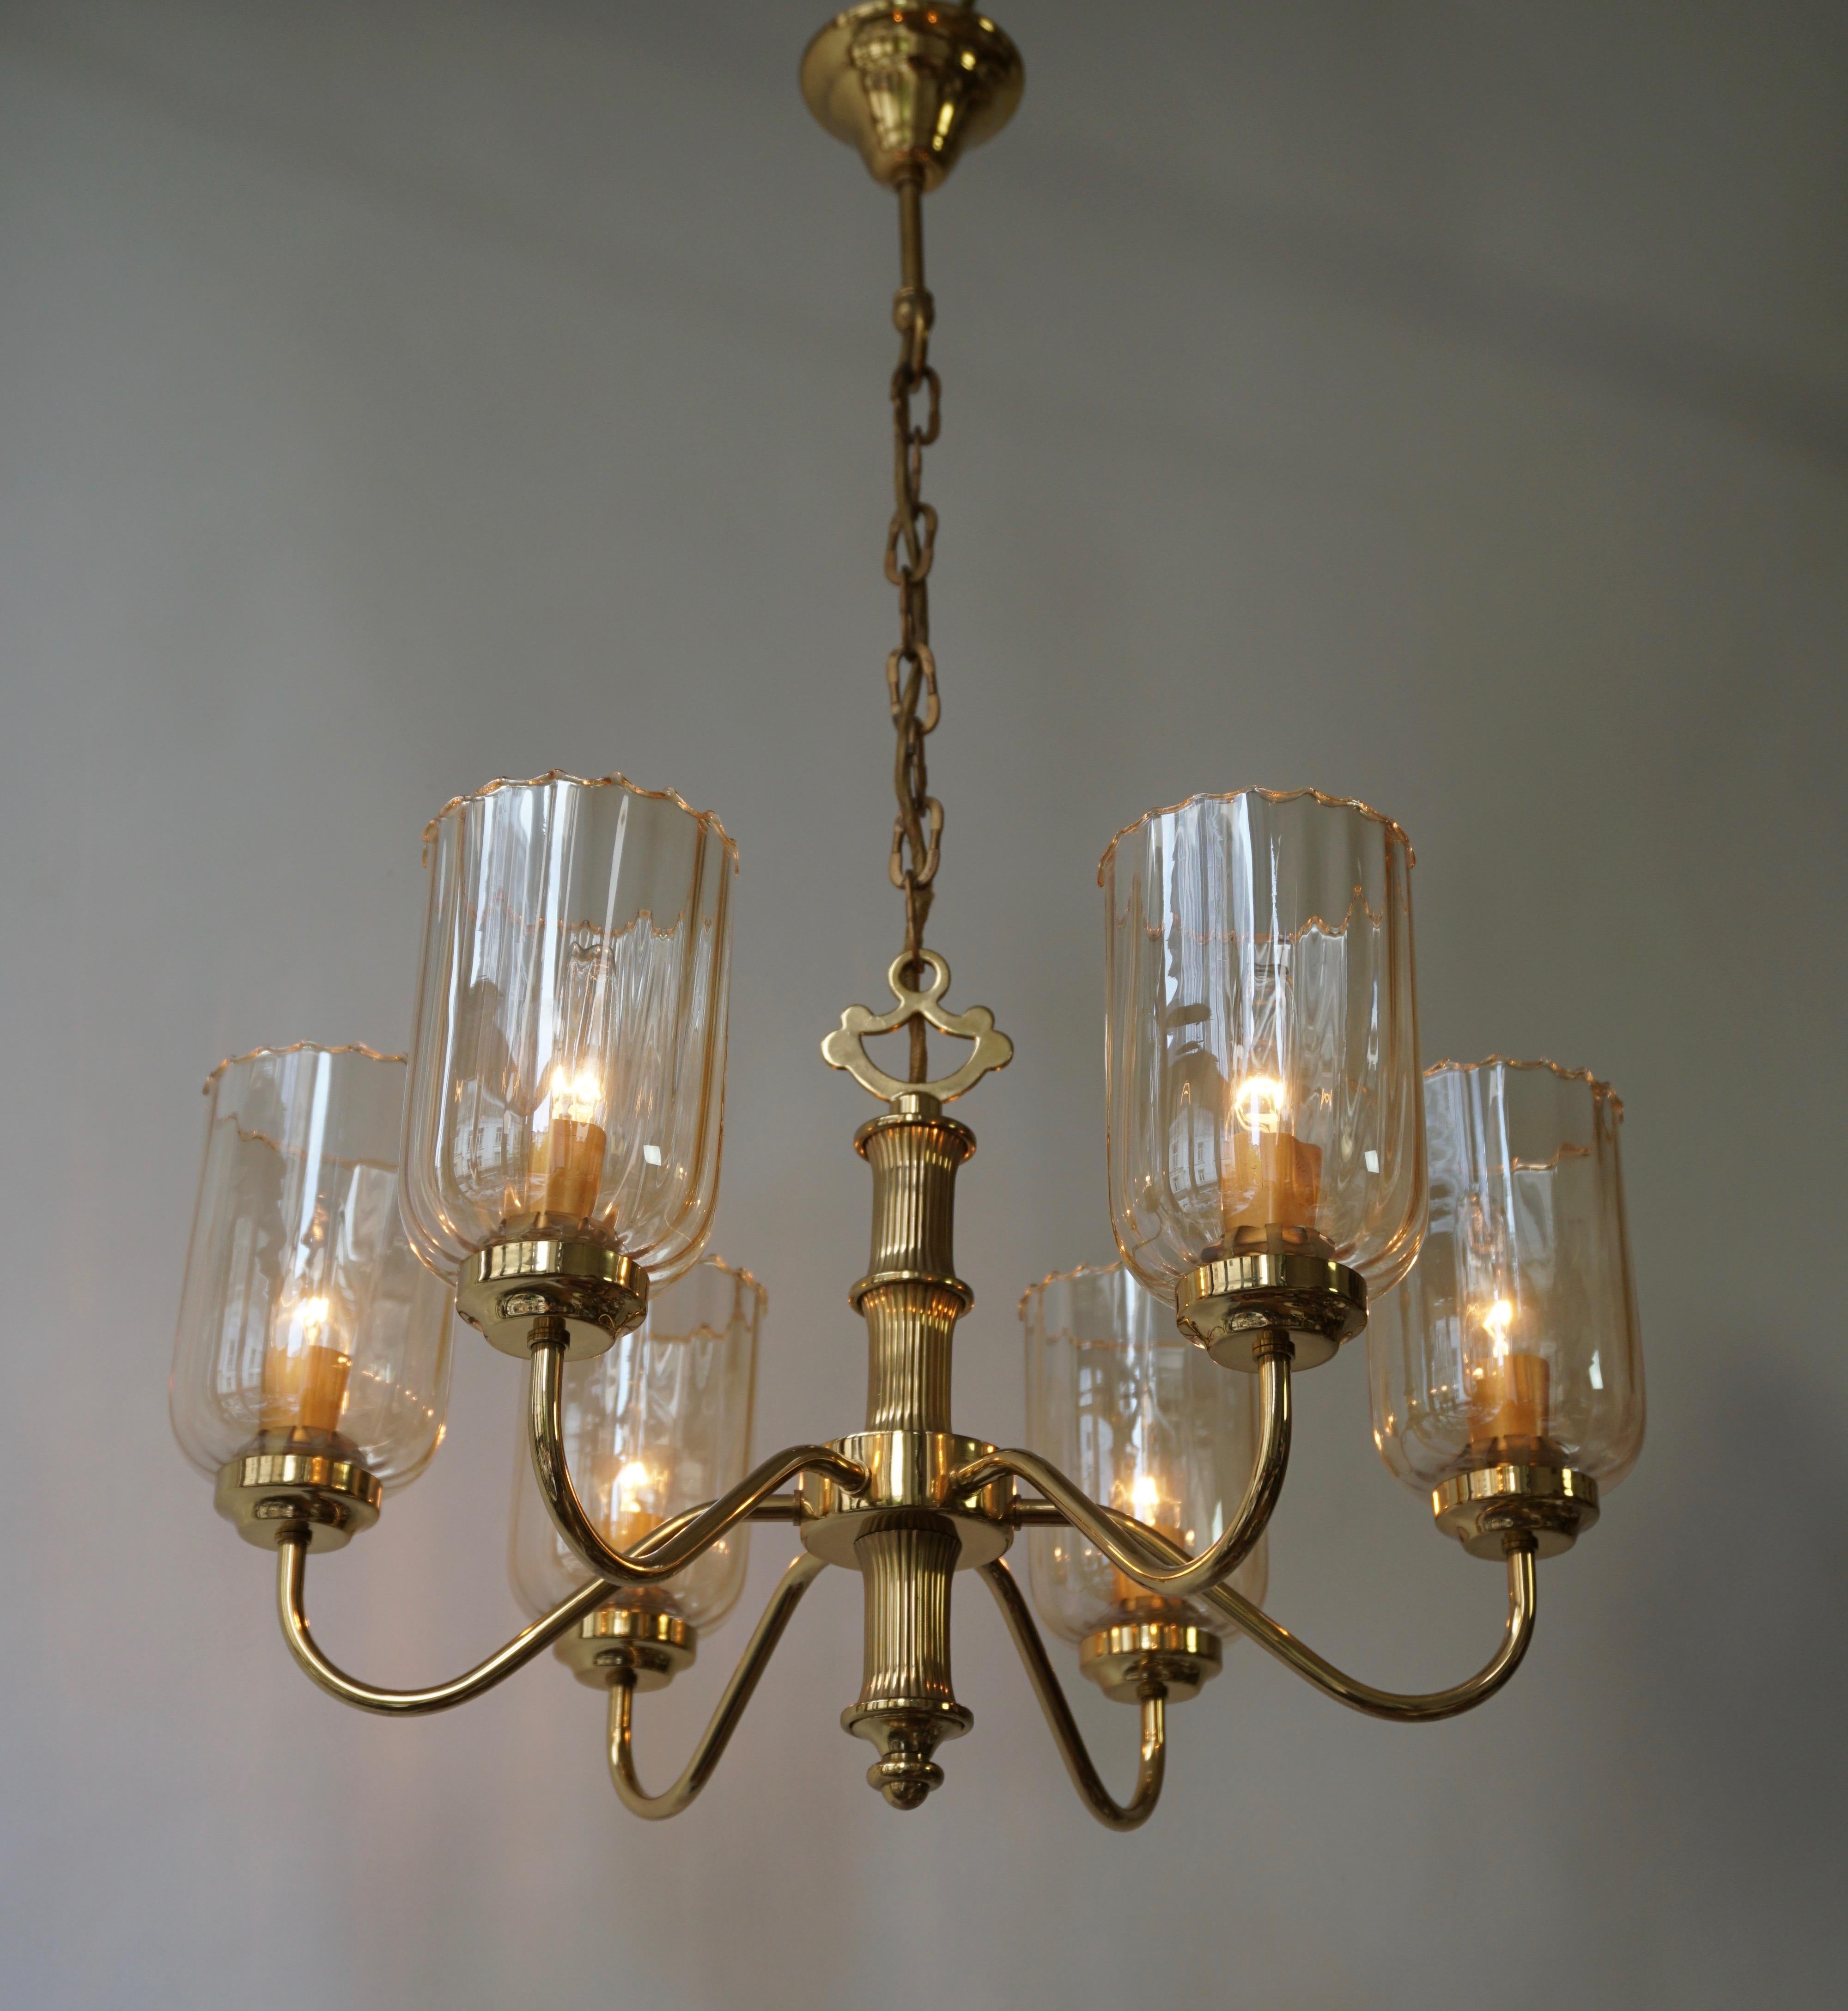 Hollywood Regency Murano Glass and Brass Chandelier 1970s Italy